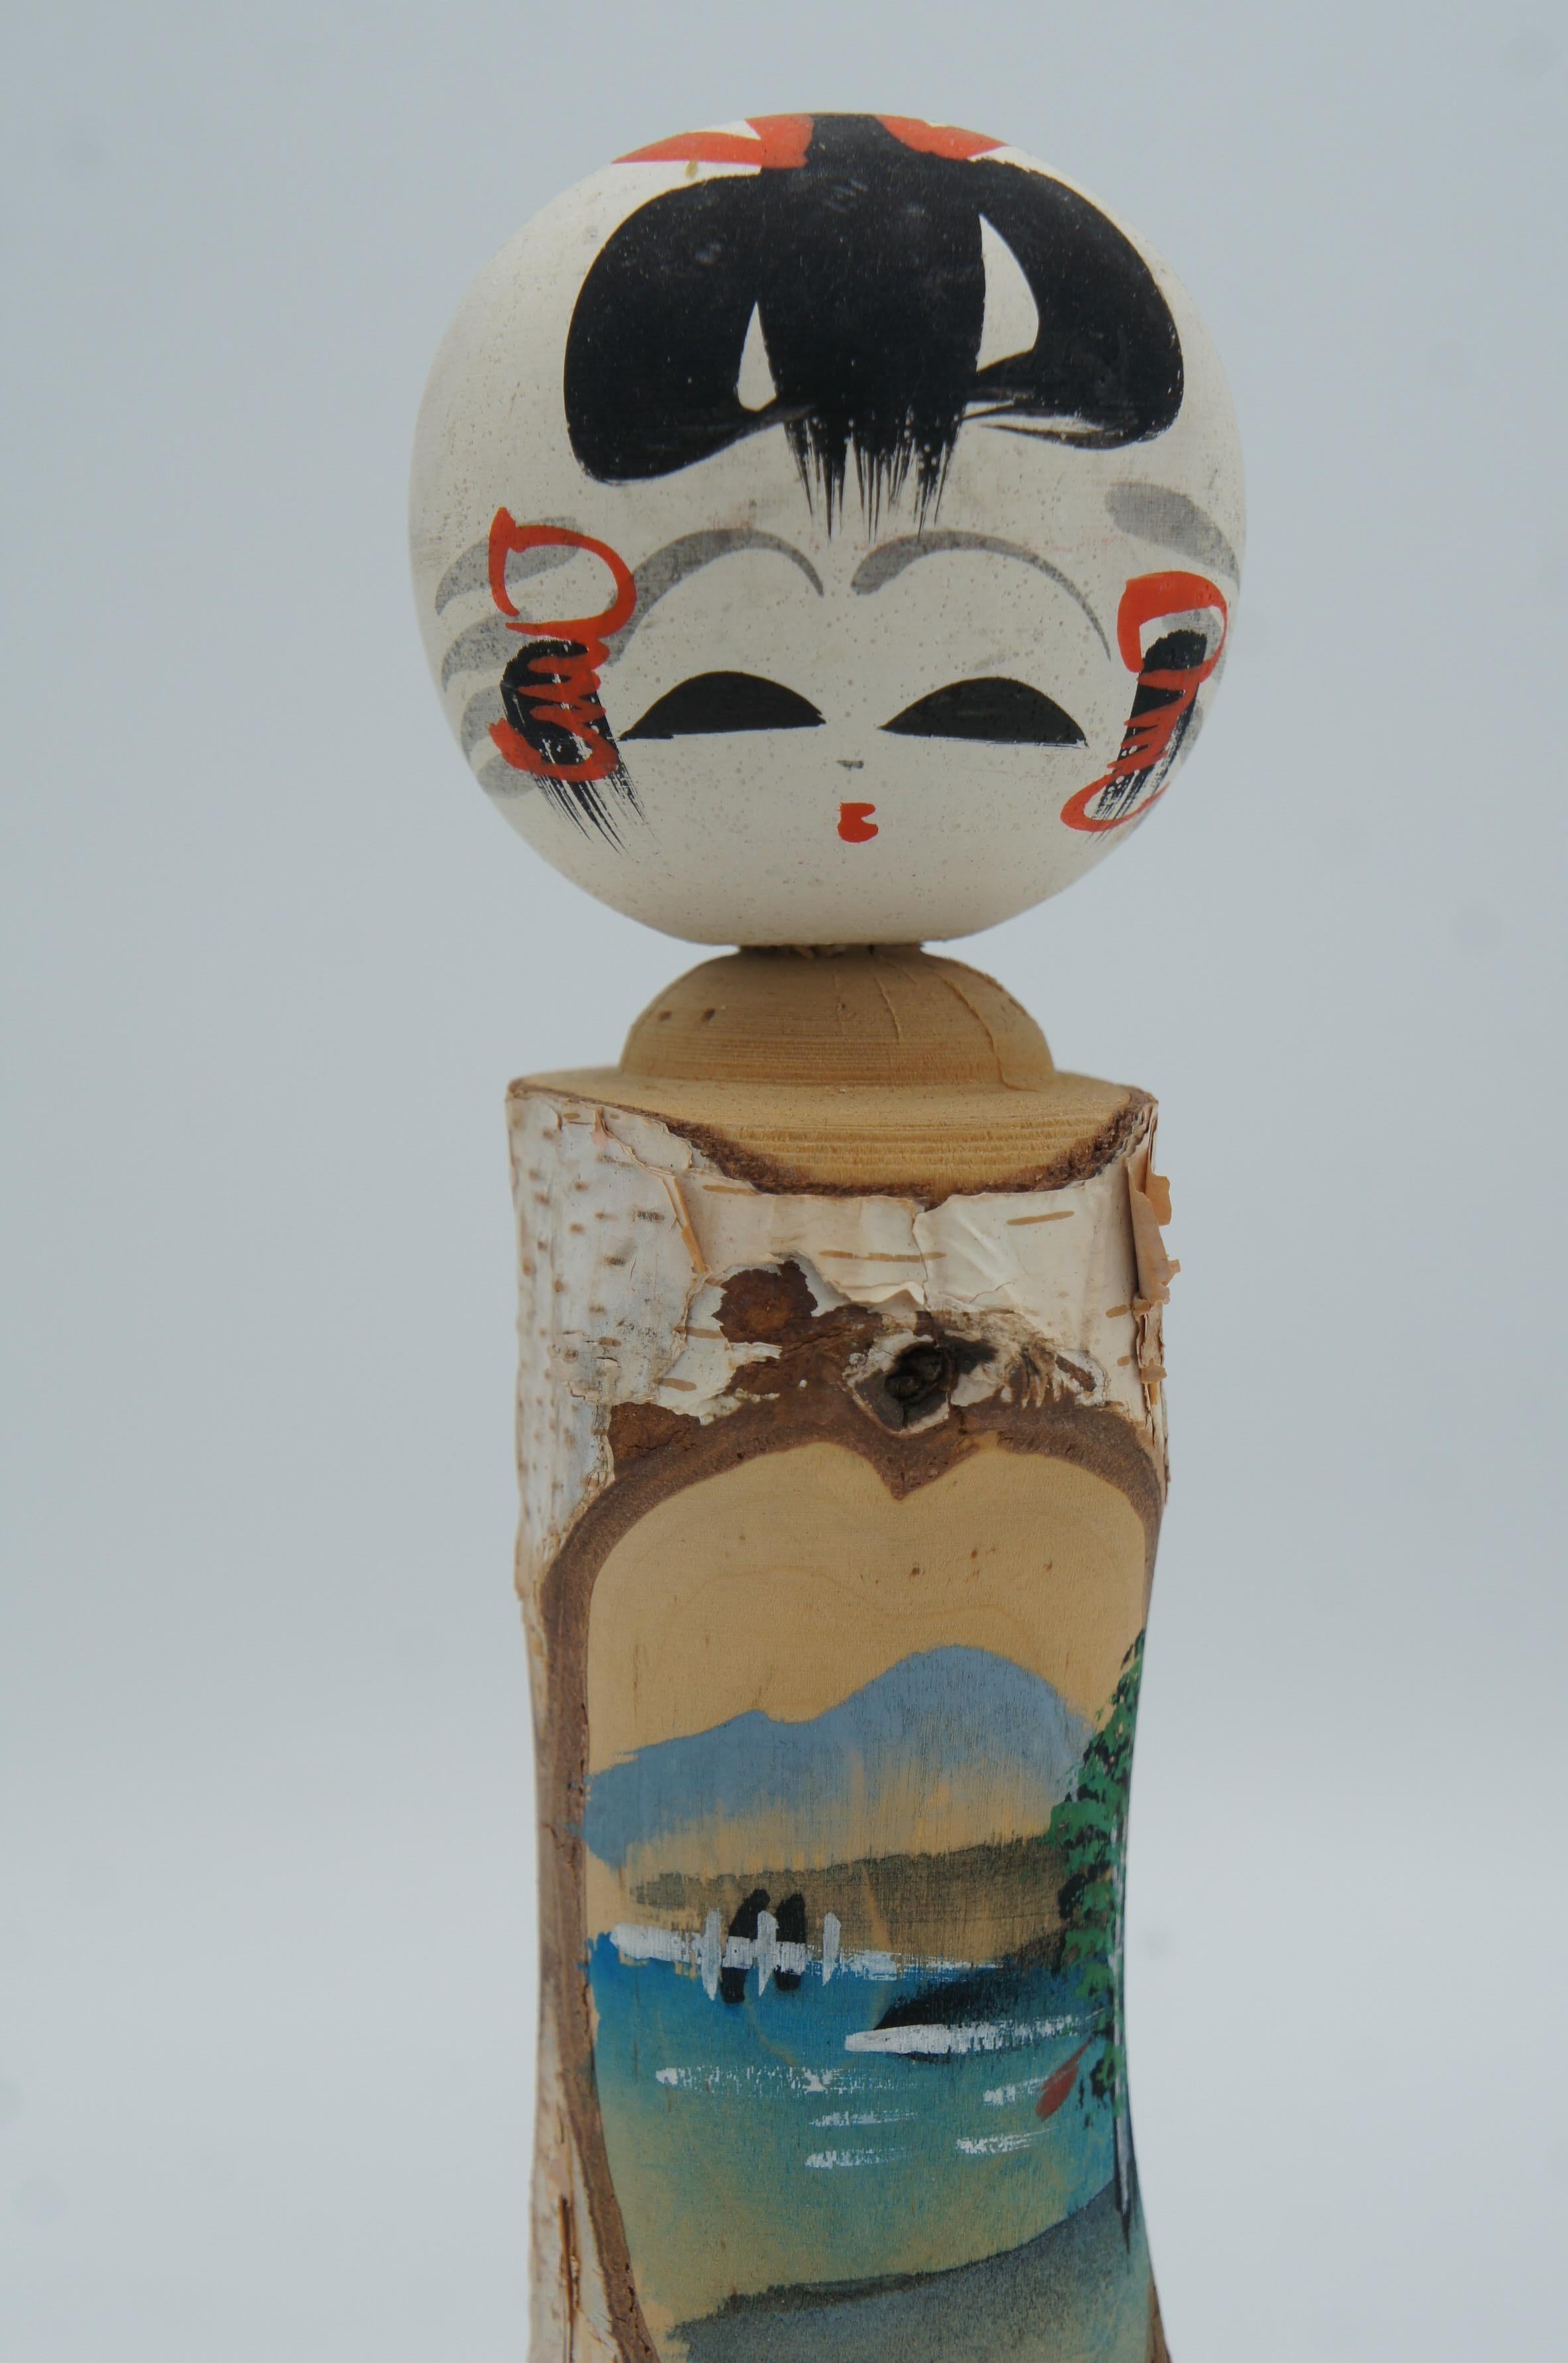 This is a kokeshi doll made with a white birch. It was made around 1980s in Showa era. This kokeshi is with new style. 

Dimension: H21 x 6.5 x 6.5 cm

Betula platyphylla, the Asian white birch or Japanese white birch, is a tree species in the